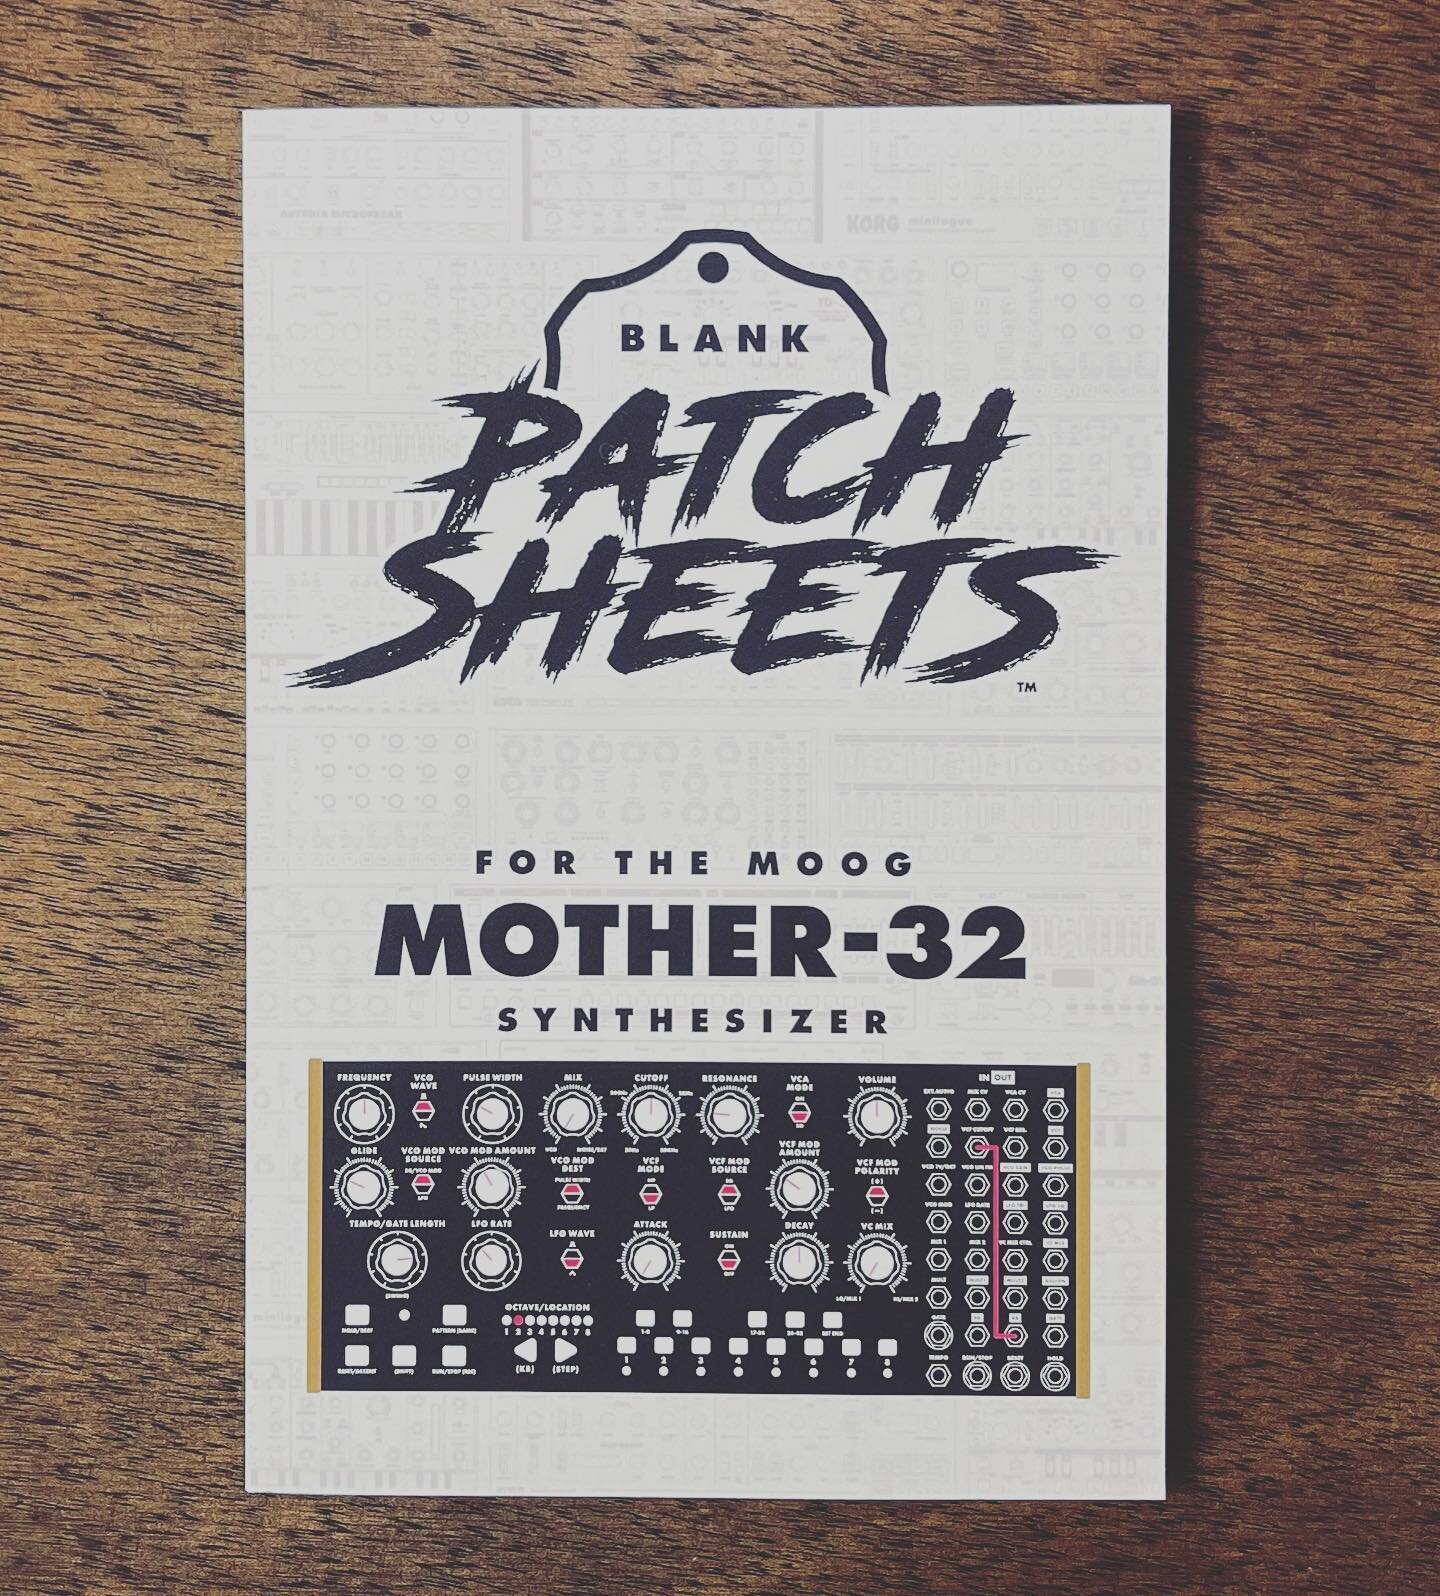 Hey #moog #mother32 owners! 🚨🗣I have amazing news. There&rsquo;s a notebook designed JUST FOR YOU! The days of forgetting your patches and song details are over. All you have to do is check out the link in bio. There are FREE printables to try befo